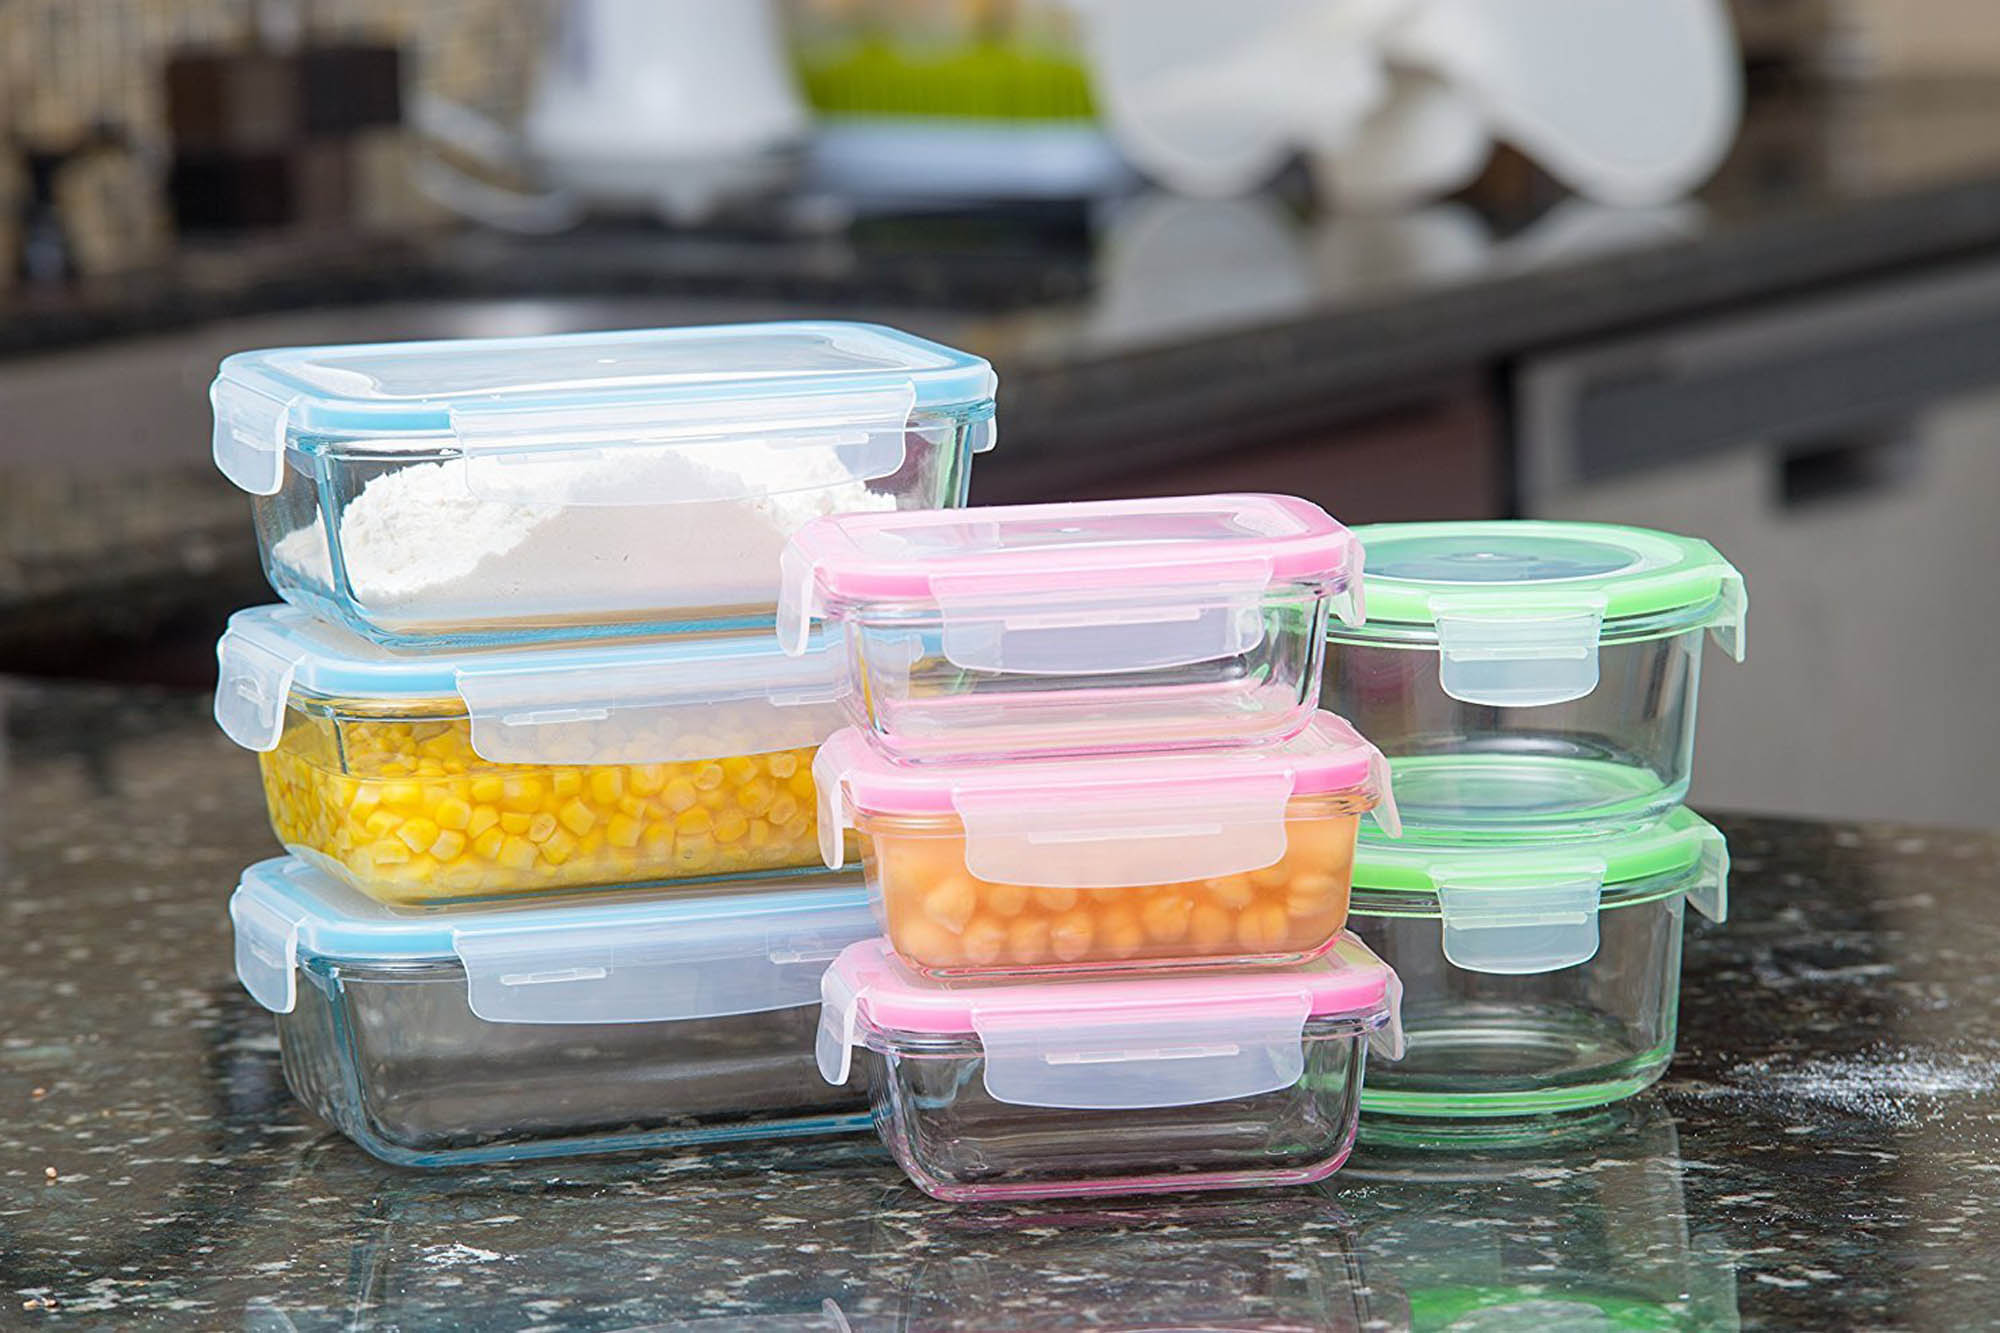 Microwaveable containers